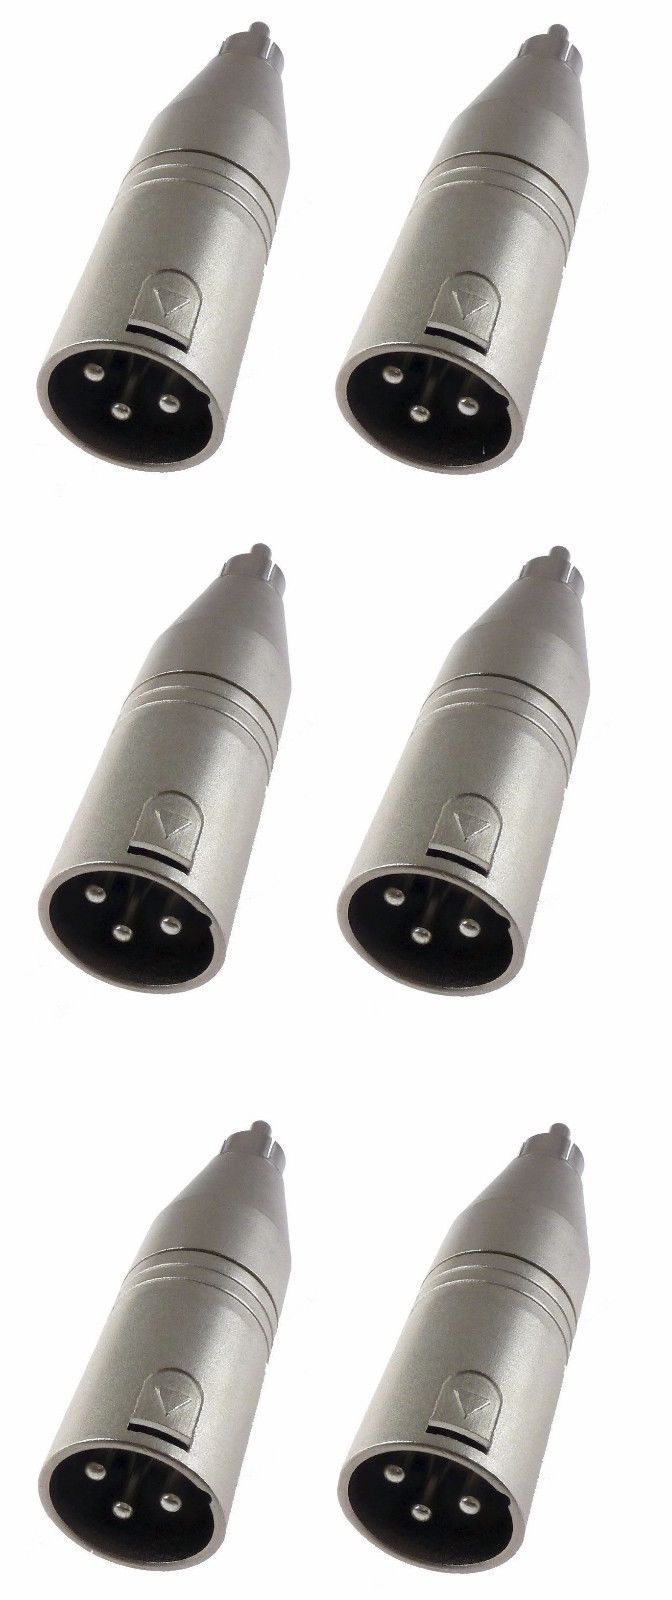 (6 Pack) Brand New ProCraft PC-TE010 Male XLR 3 Pin to Male RCA Adapter Plug